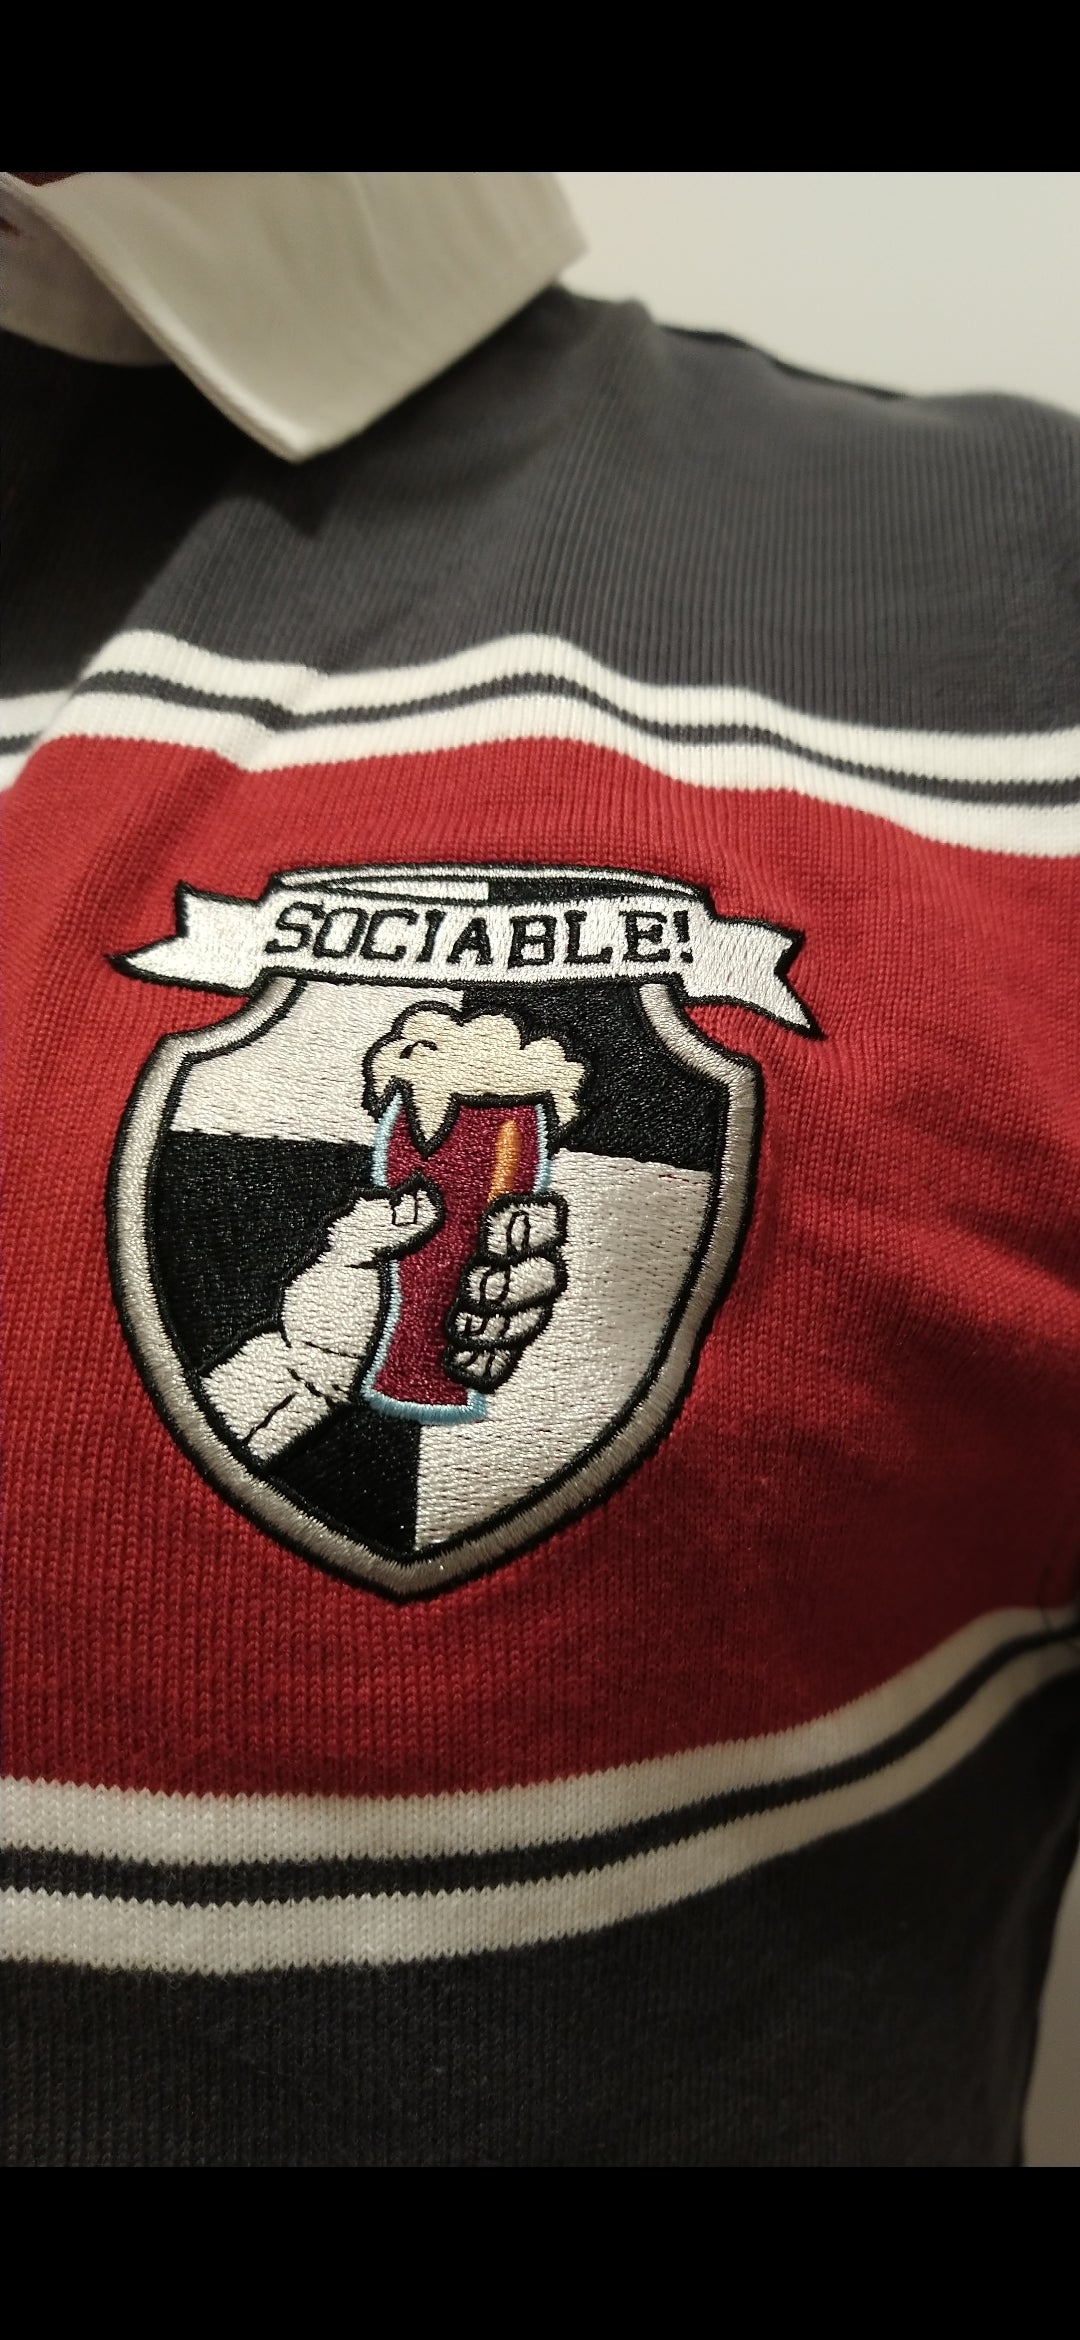 A red and grey rugby shirt with sociable beer crest